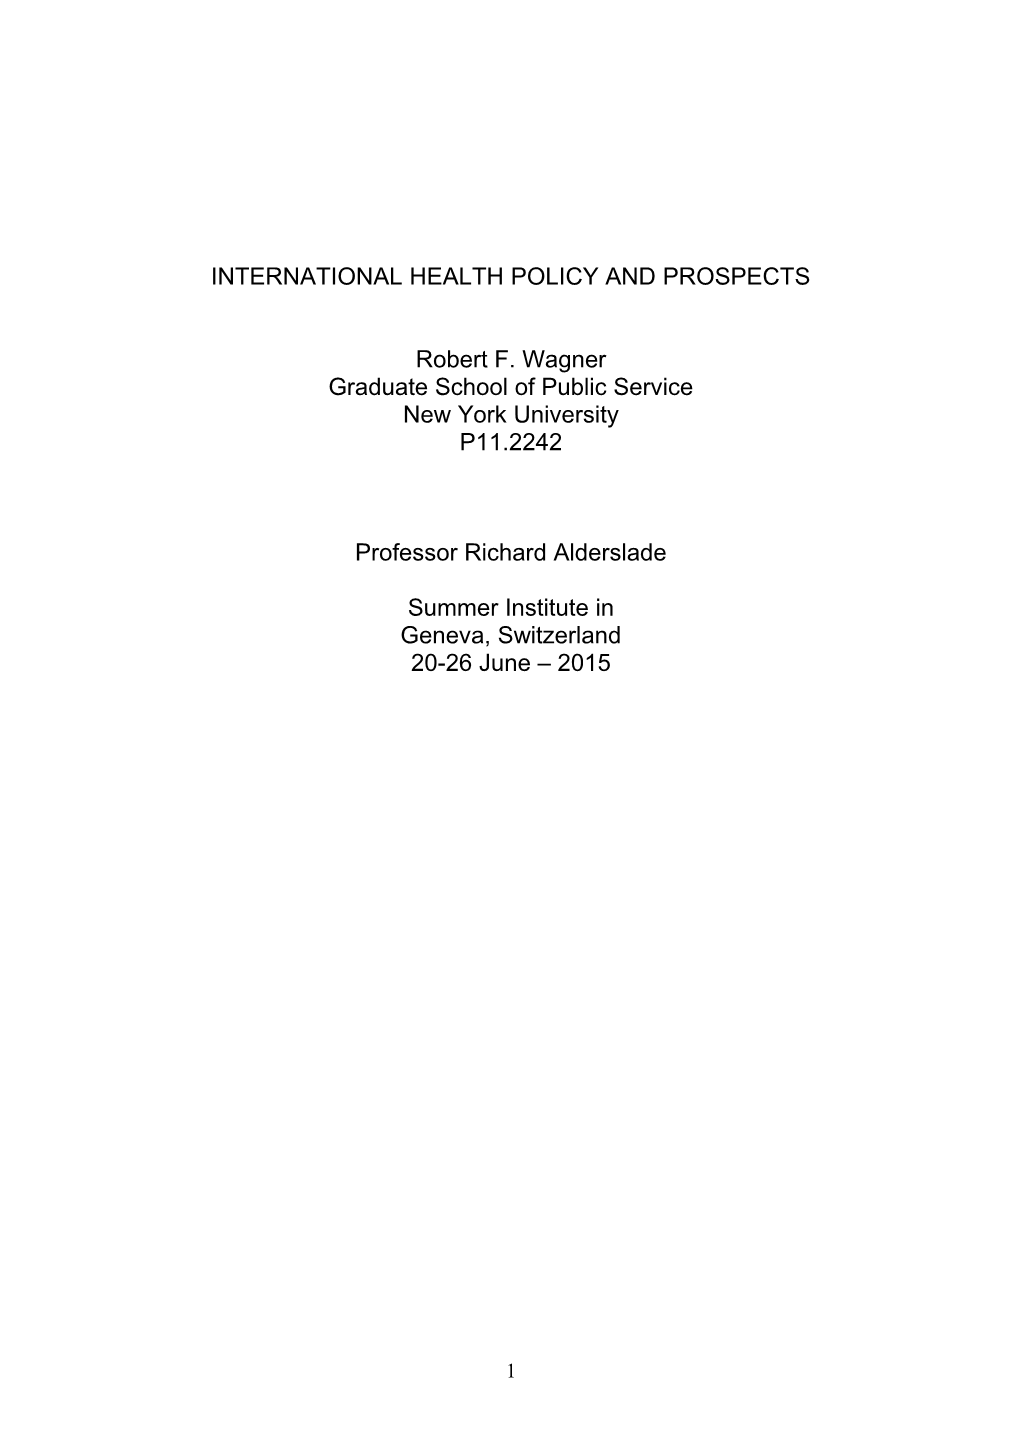 International Health Policy and Prospects